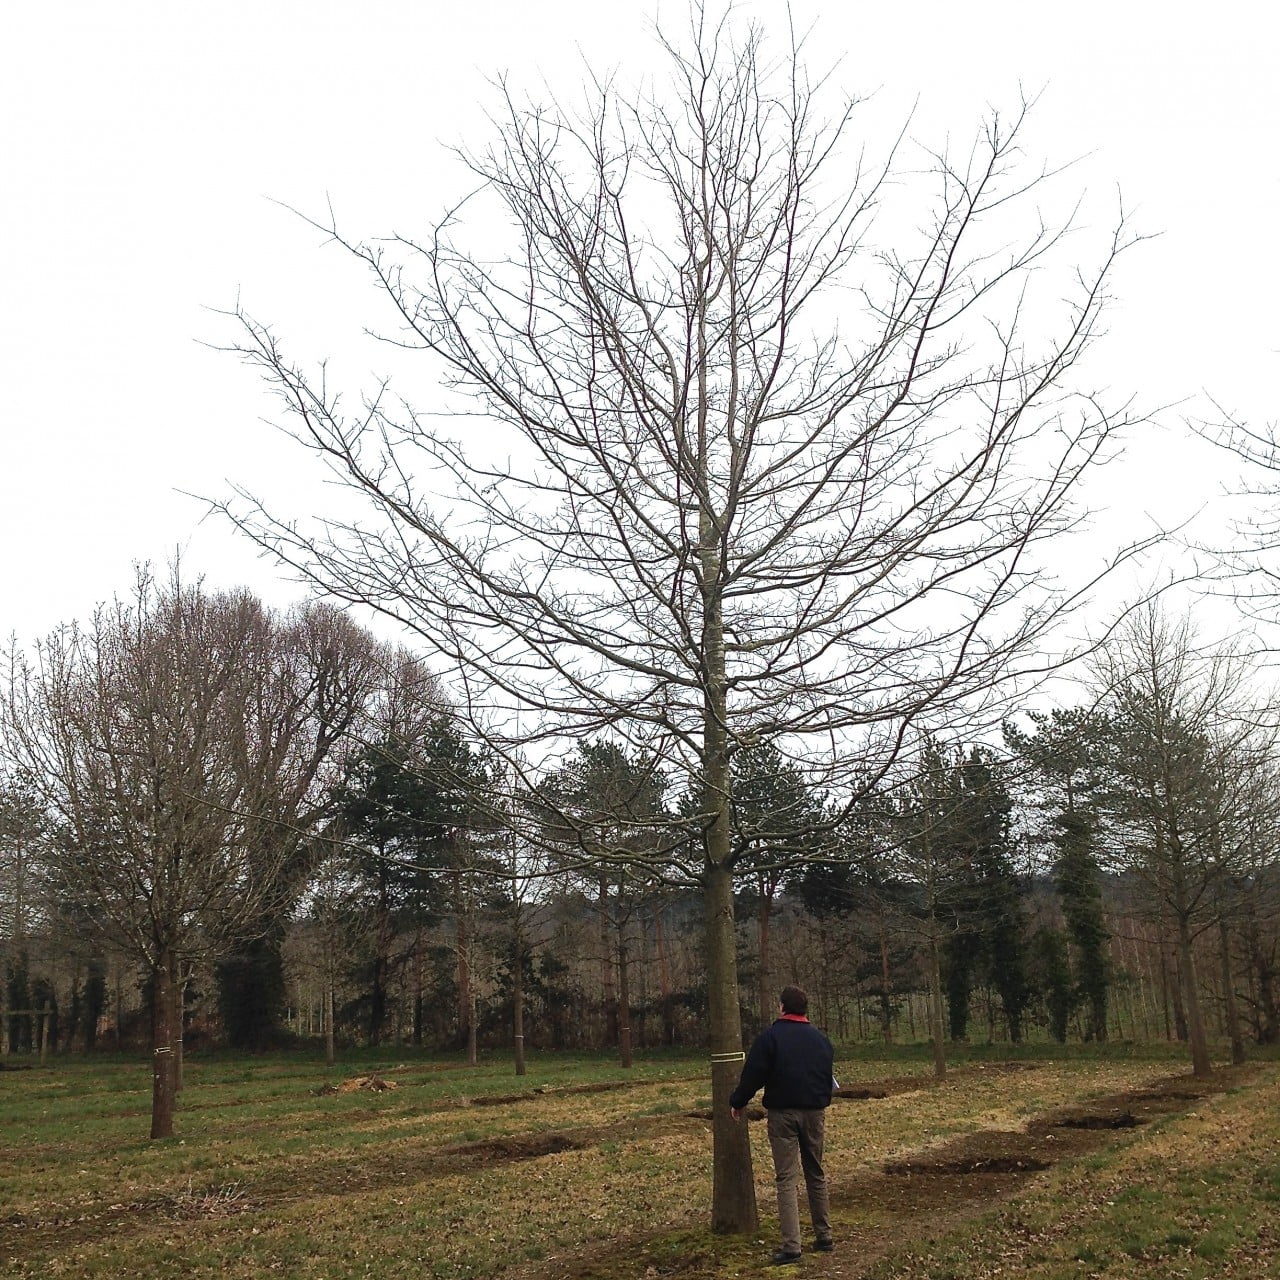 I bought this lovely oak tree from Hilliers tree nursery for my clients near Wargrave. It will be quite the showpiece when it goes in. We buy them in the field like this & whist still dormant they are dug up & transported to their new home. They wake in the spring to a new view! Providing they are carefully handled, well guyed, watered & fed they do not mind in the least